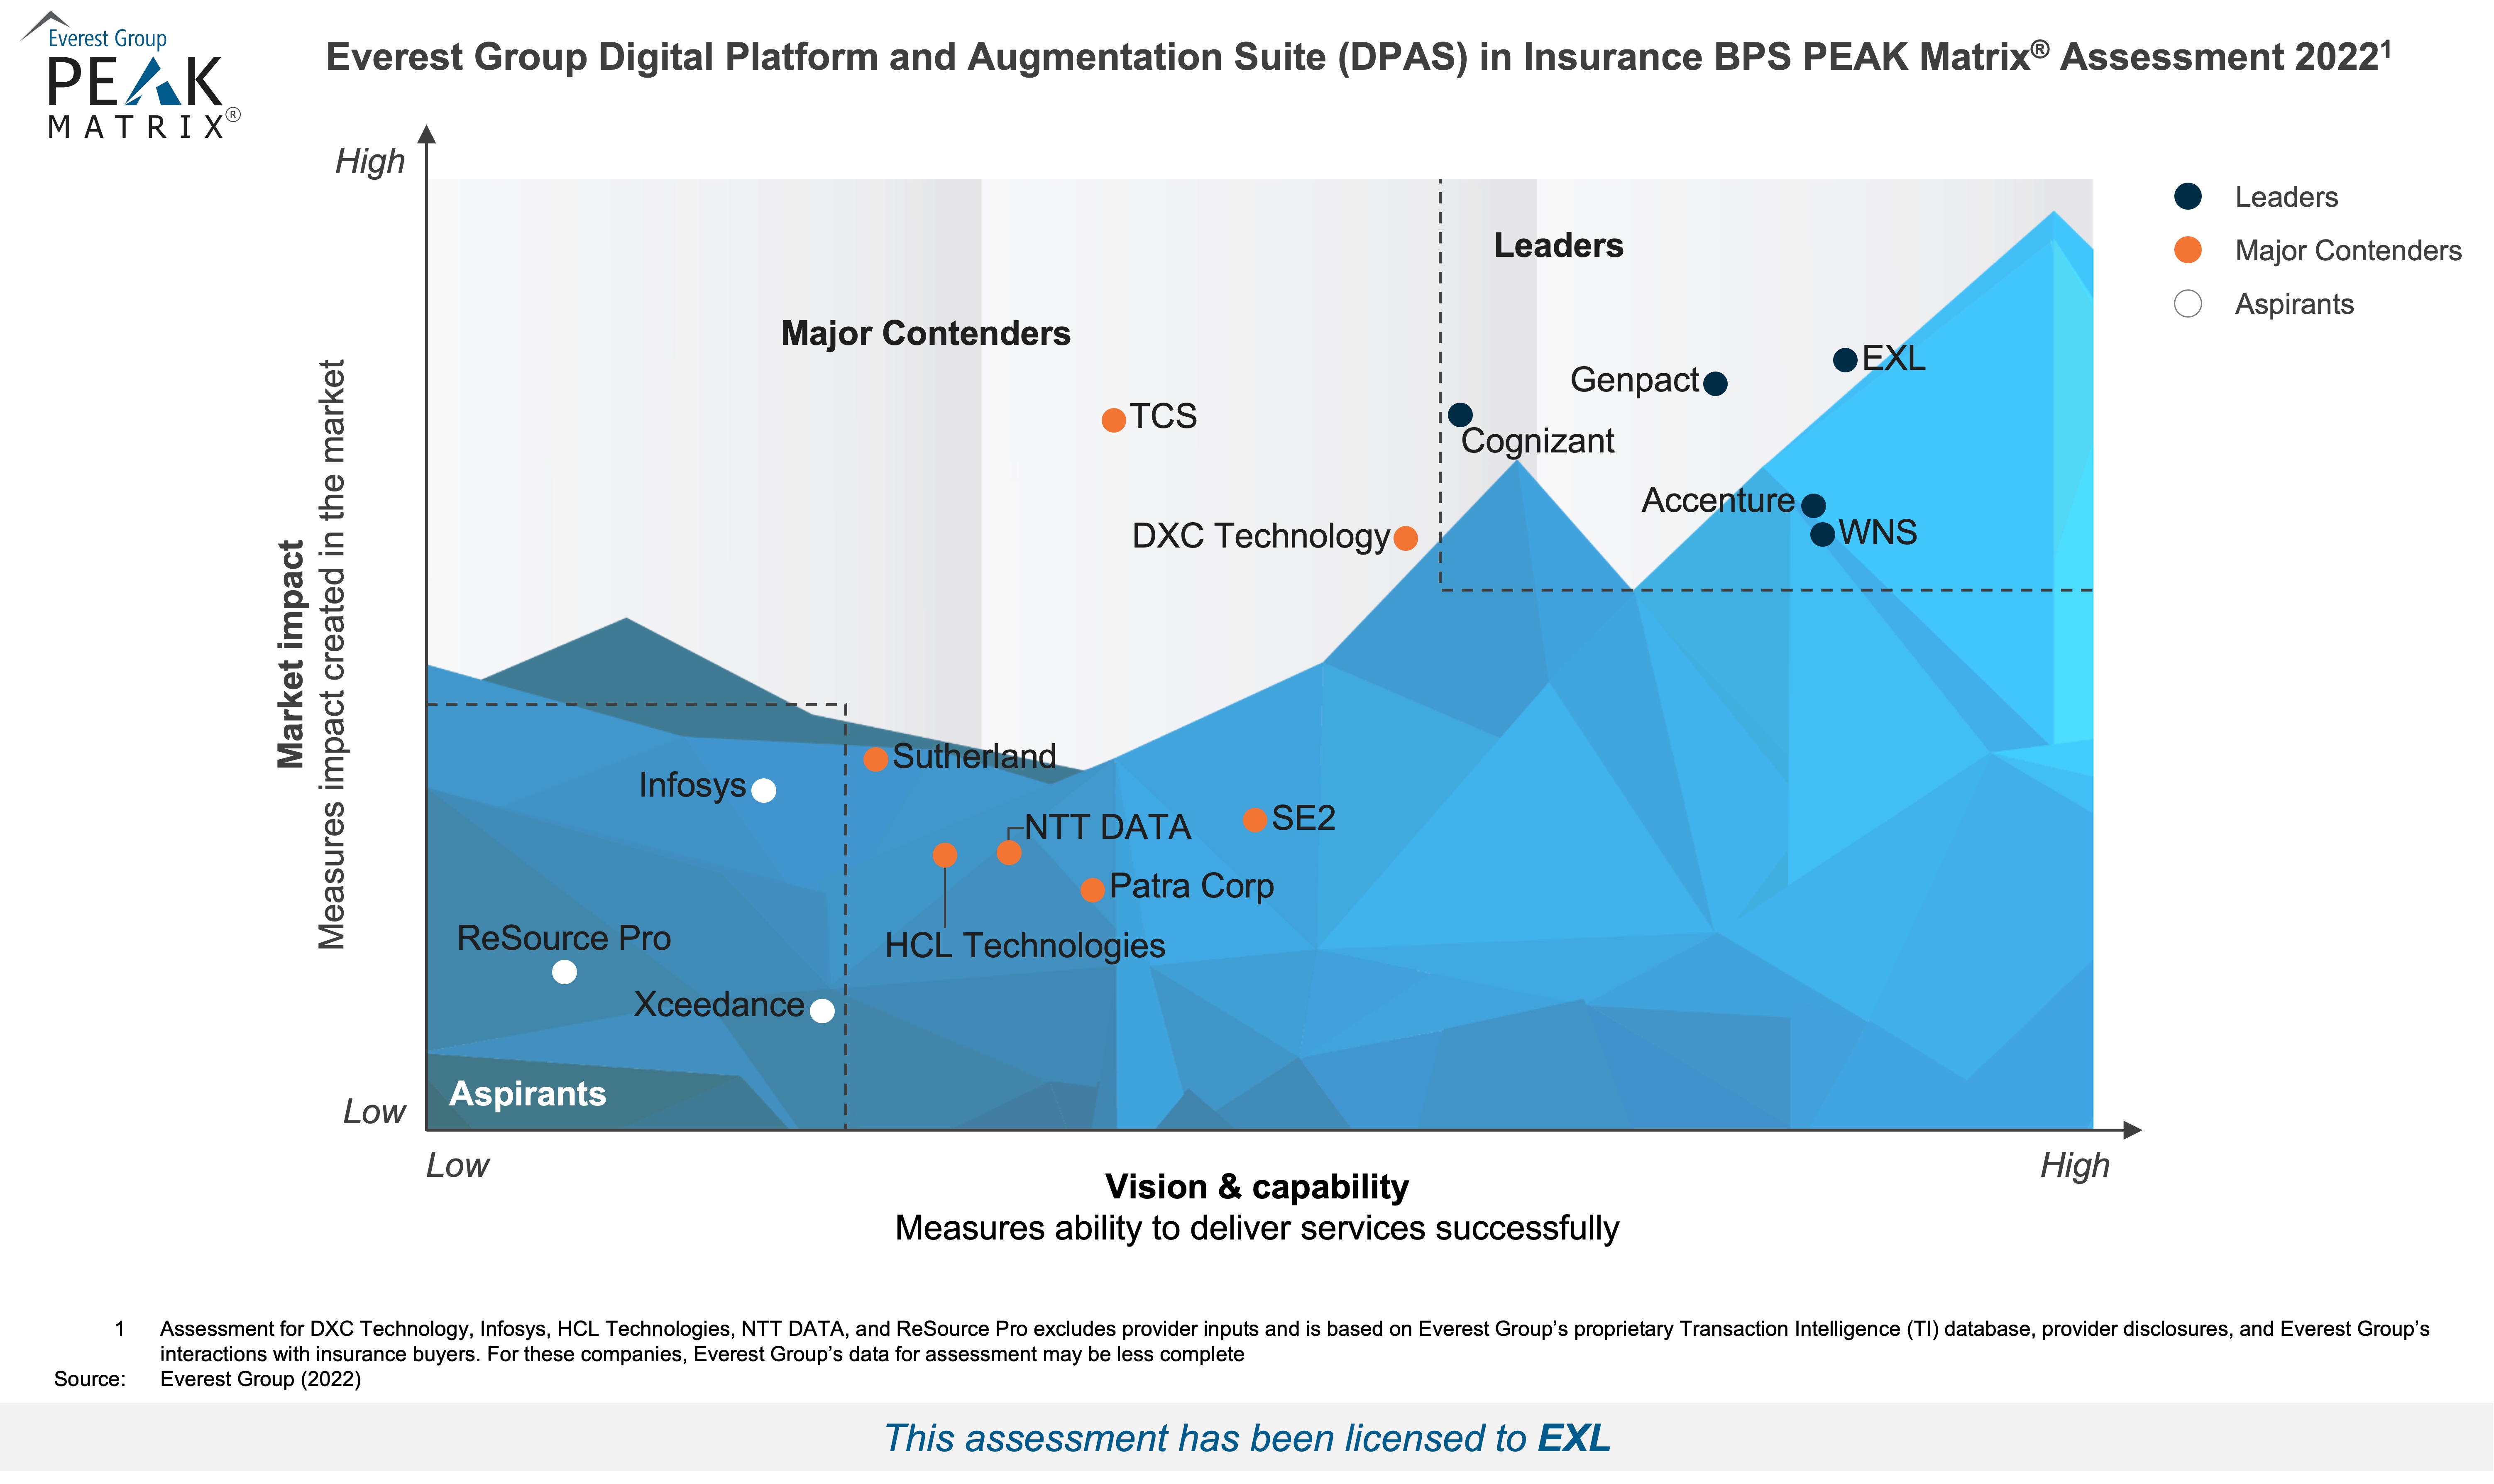 EXL leads the pack in Everest Group’s Digital Platforms and Augmentation Suite 